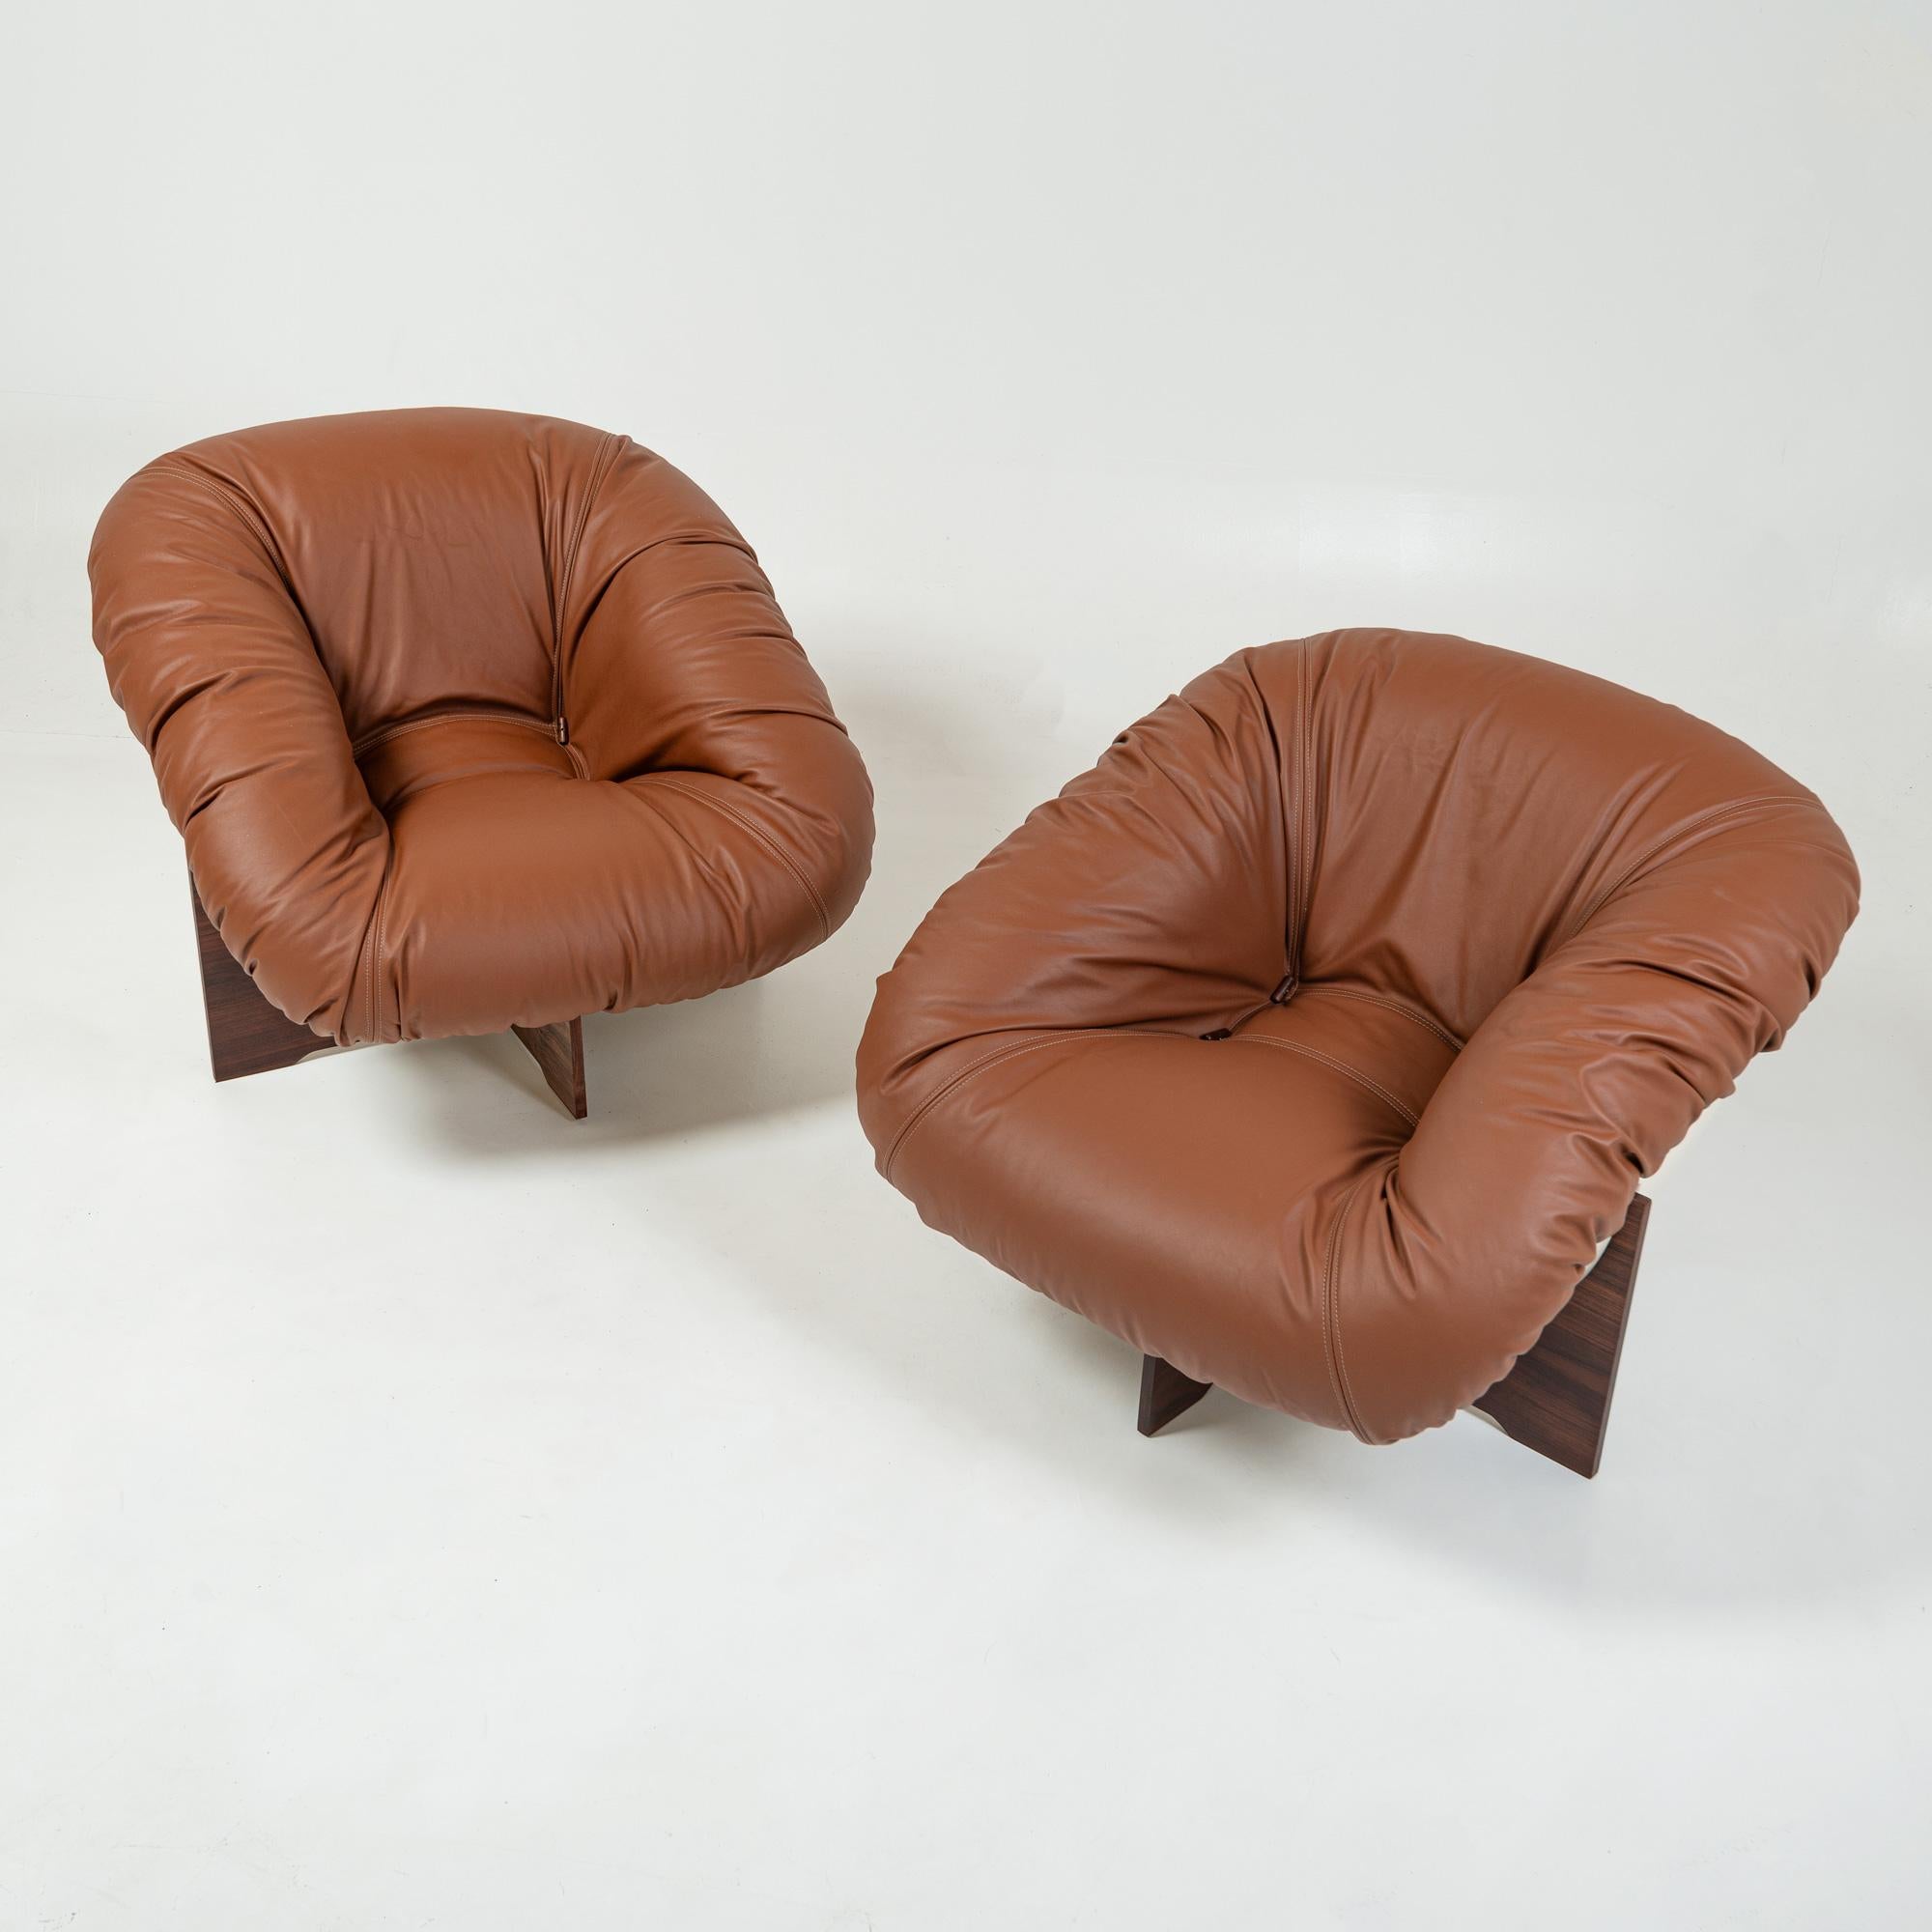 Percival Lafer's Lounge Chair model MP-61 in Maharam Leather and Rosewood, 1973 For Sale 8